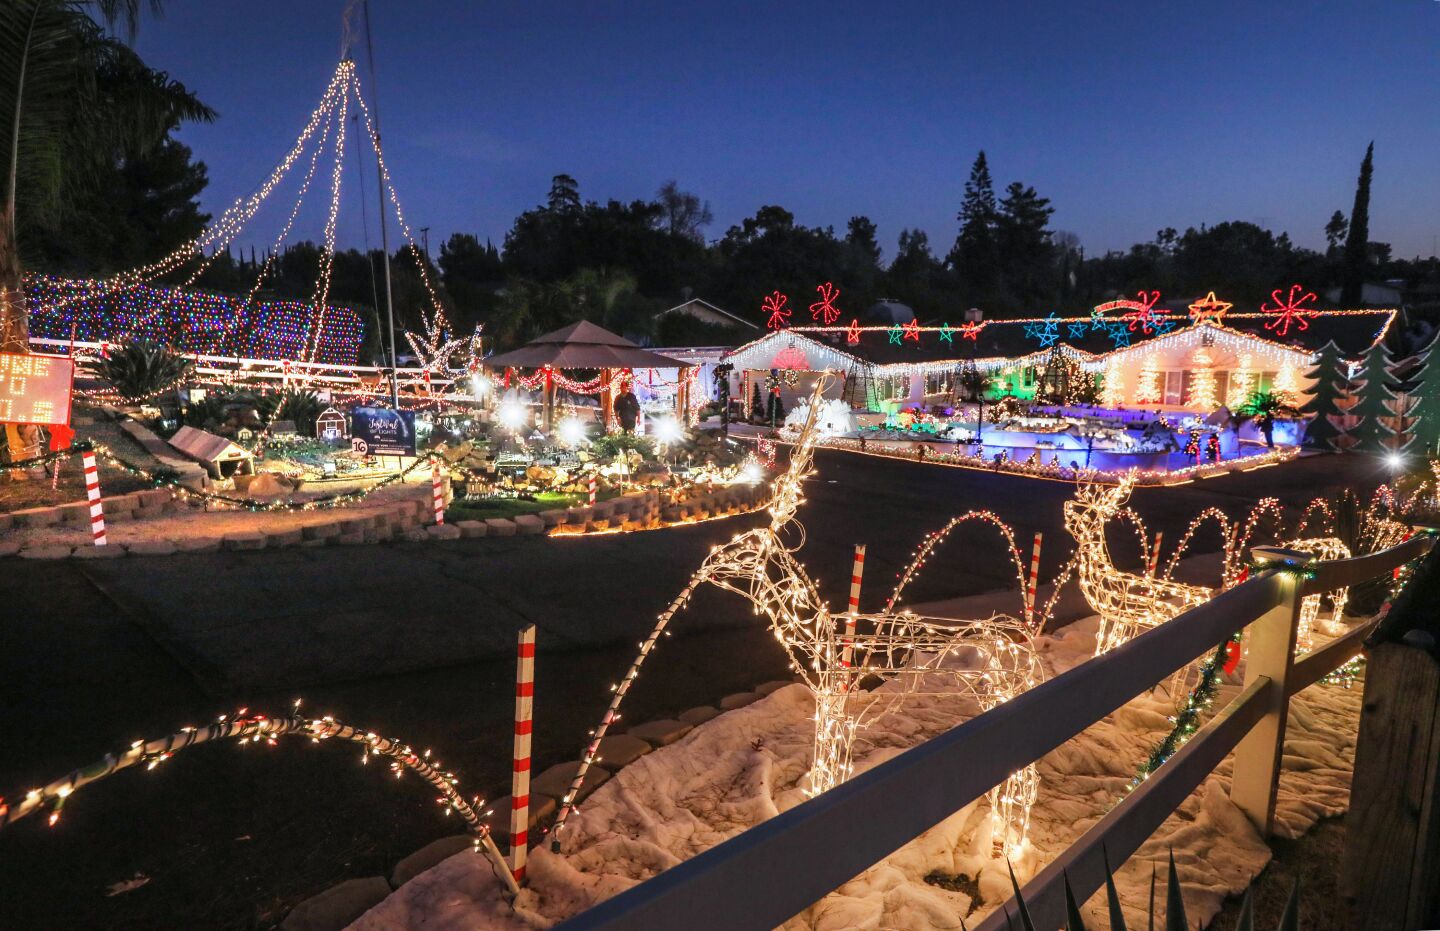 Christmas decorations light up the home of Mack Schreiber on Reche Road in Fallbrook.